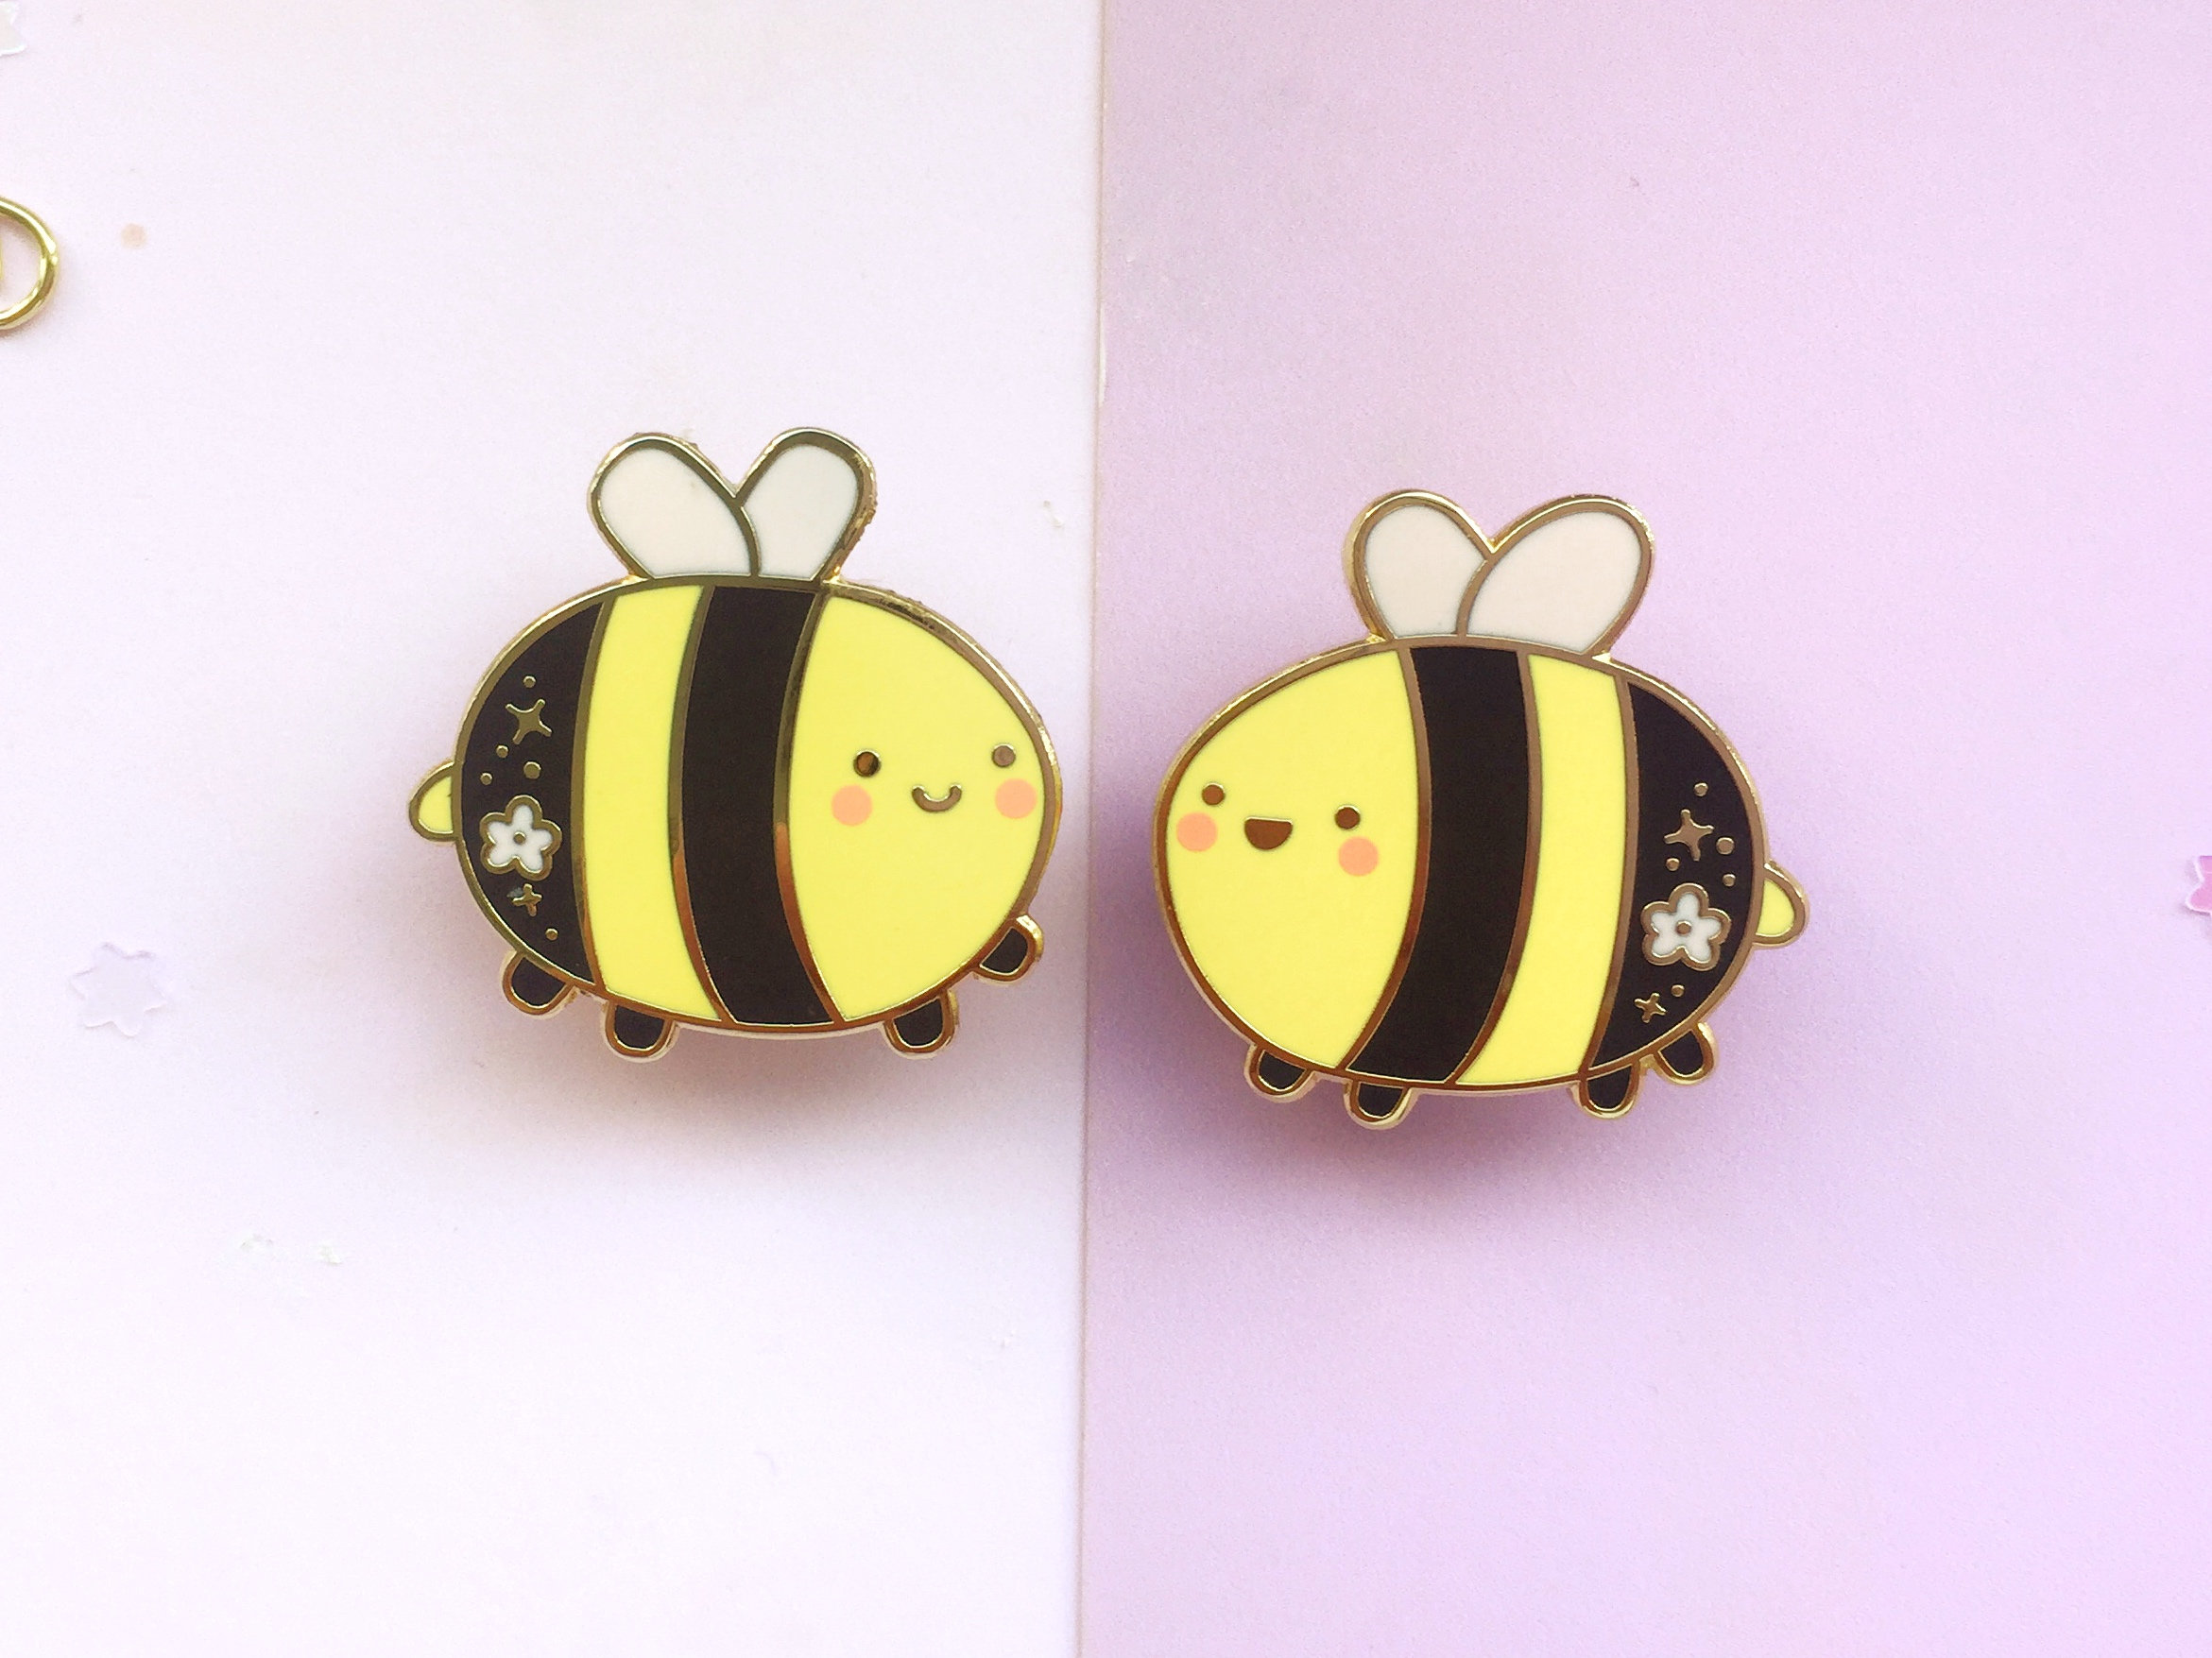 Bee Buddies Pins Set From the Cute Nature Friends Collection | Etsy